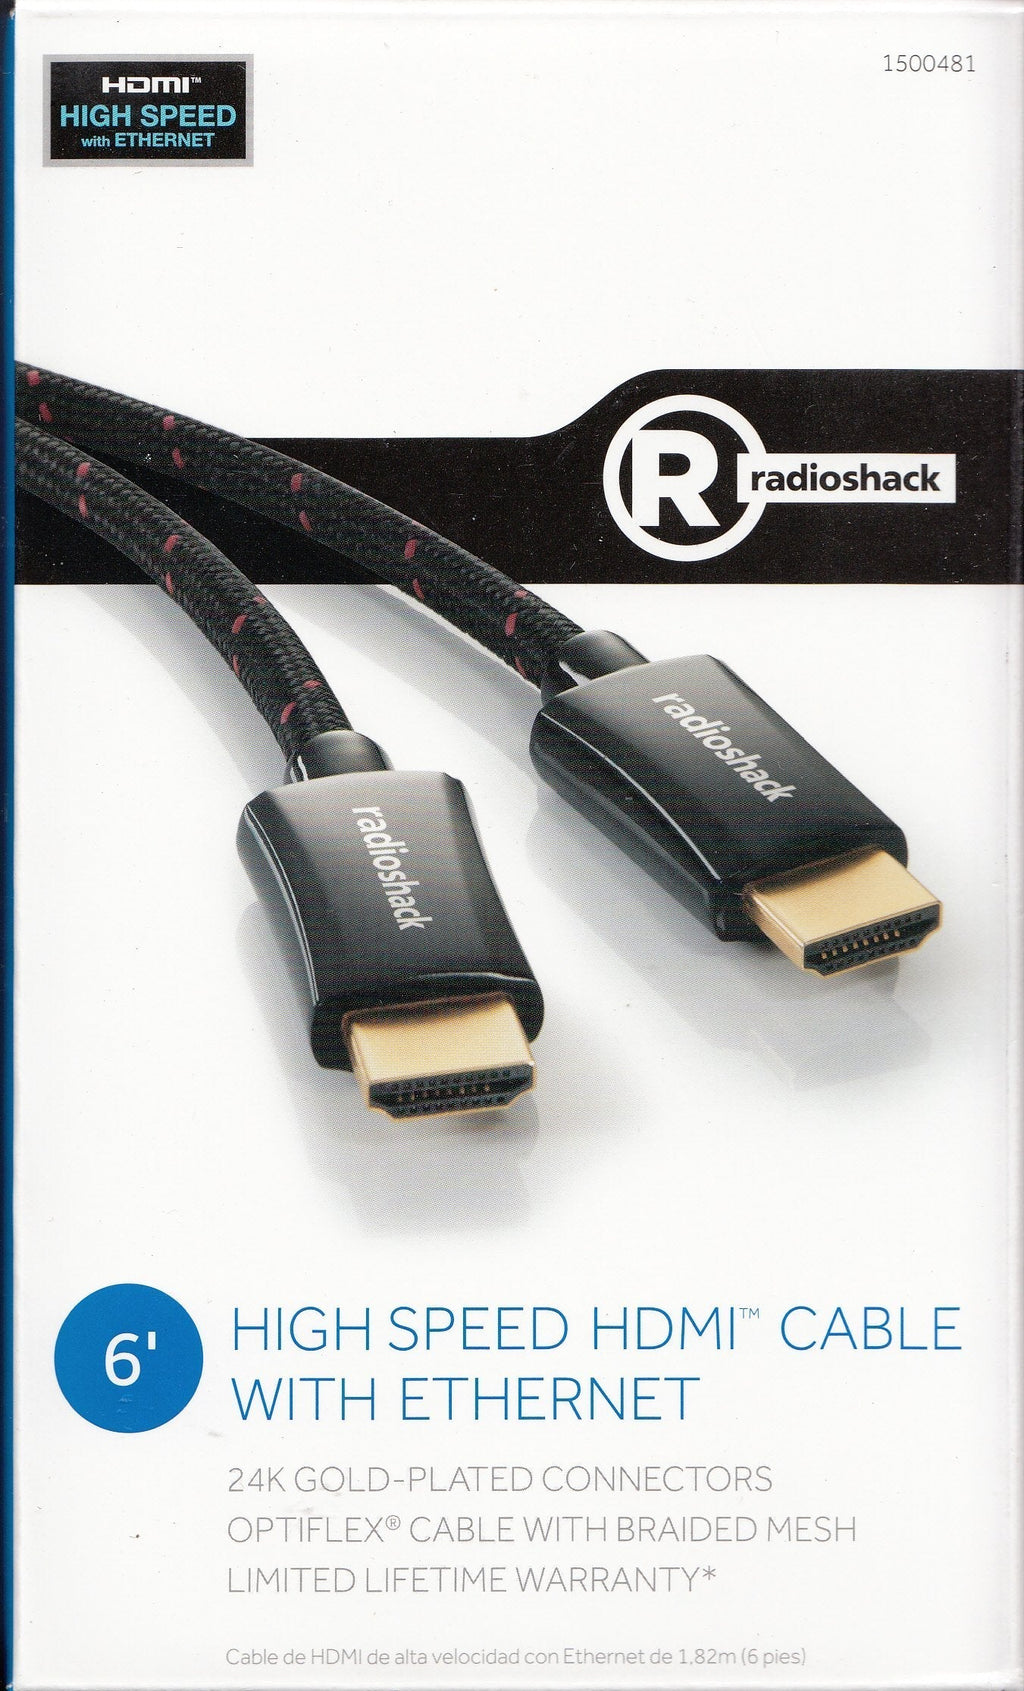 Radioshack 6' High Speed Hdmi Cable with Ethernet